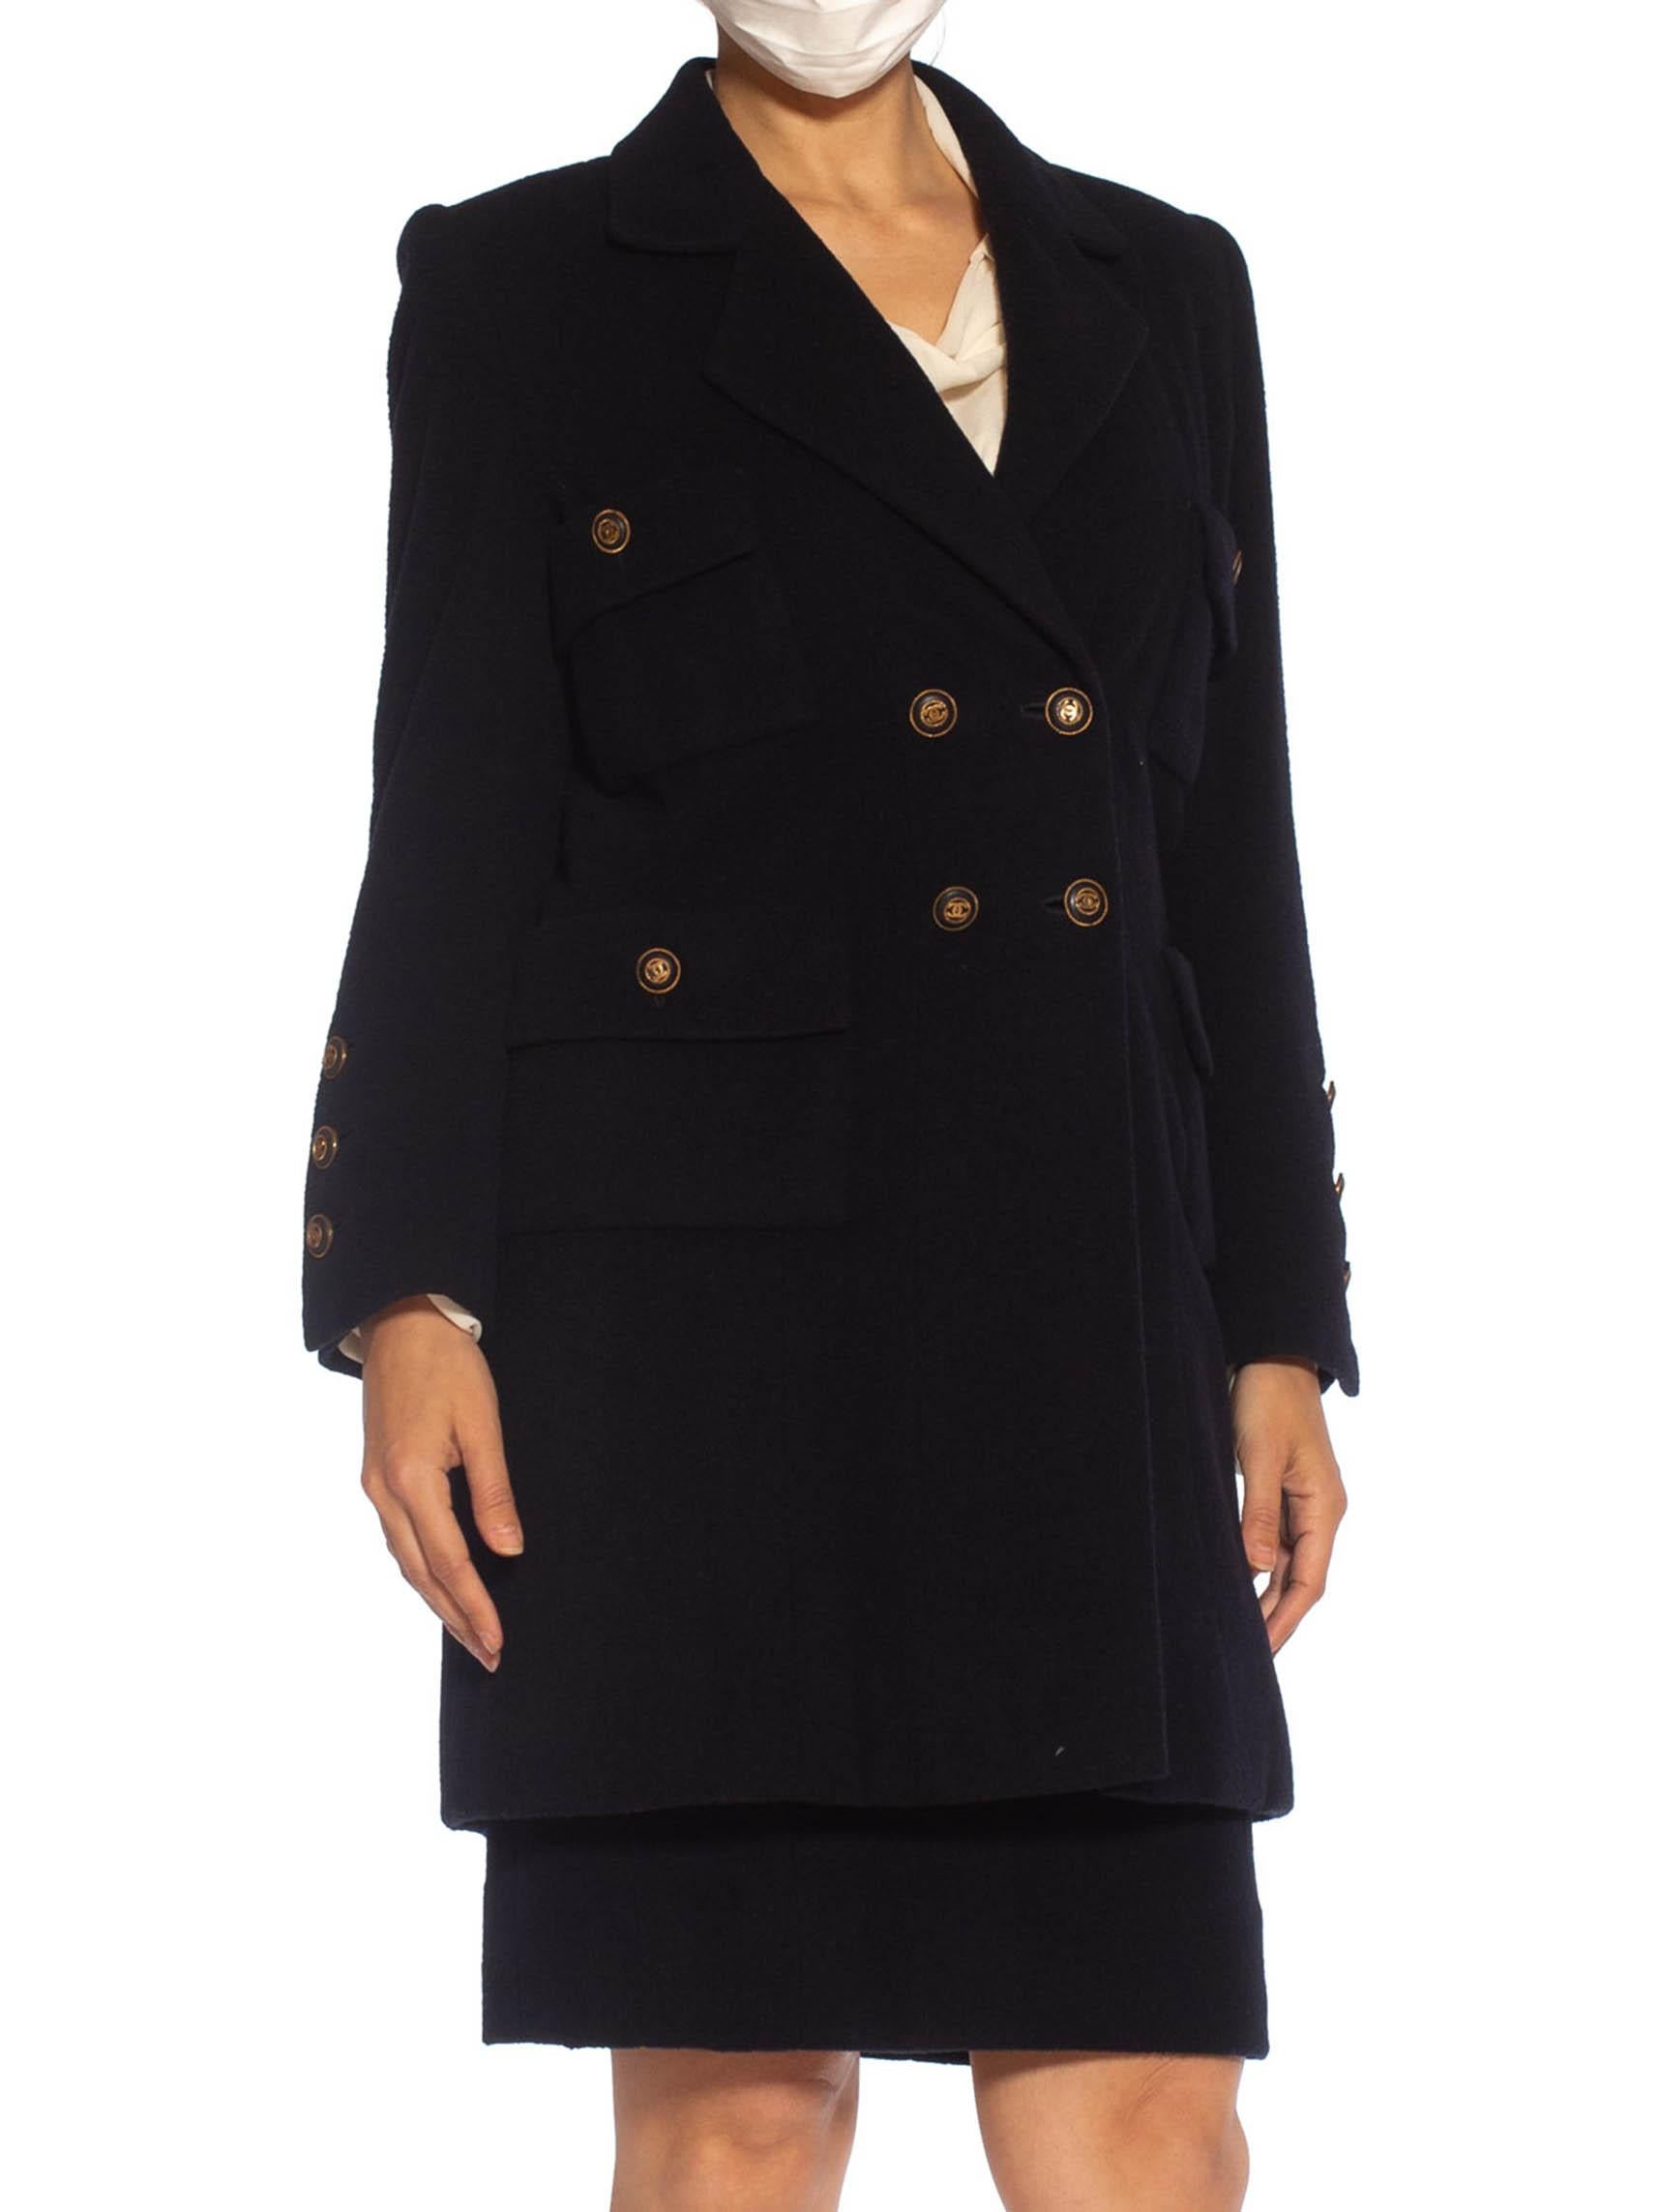 1980S CHANEL Navy Blue Haute Couture Cashmere Blend Boiled Wool 3/4 Length Coat For Sale 3